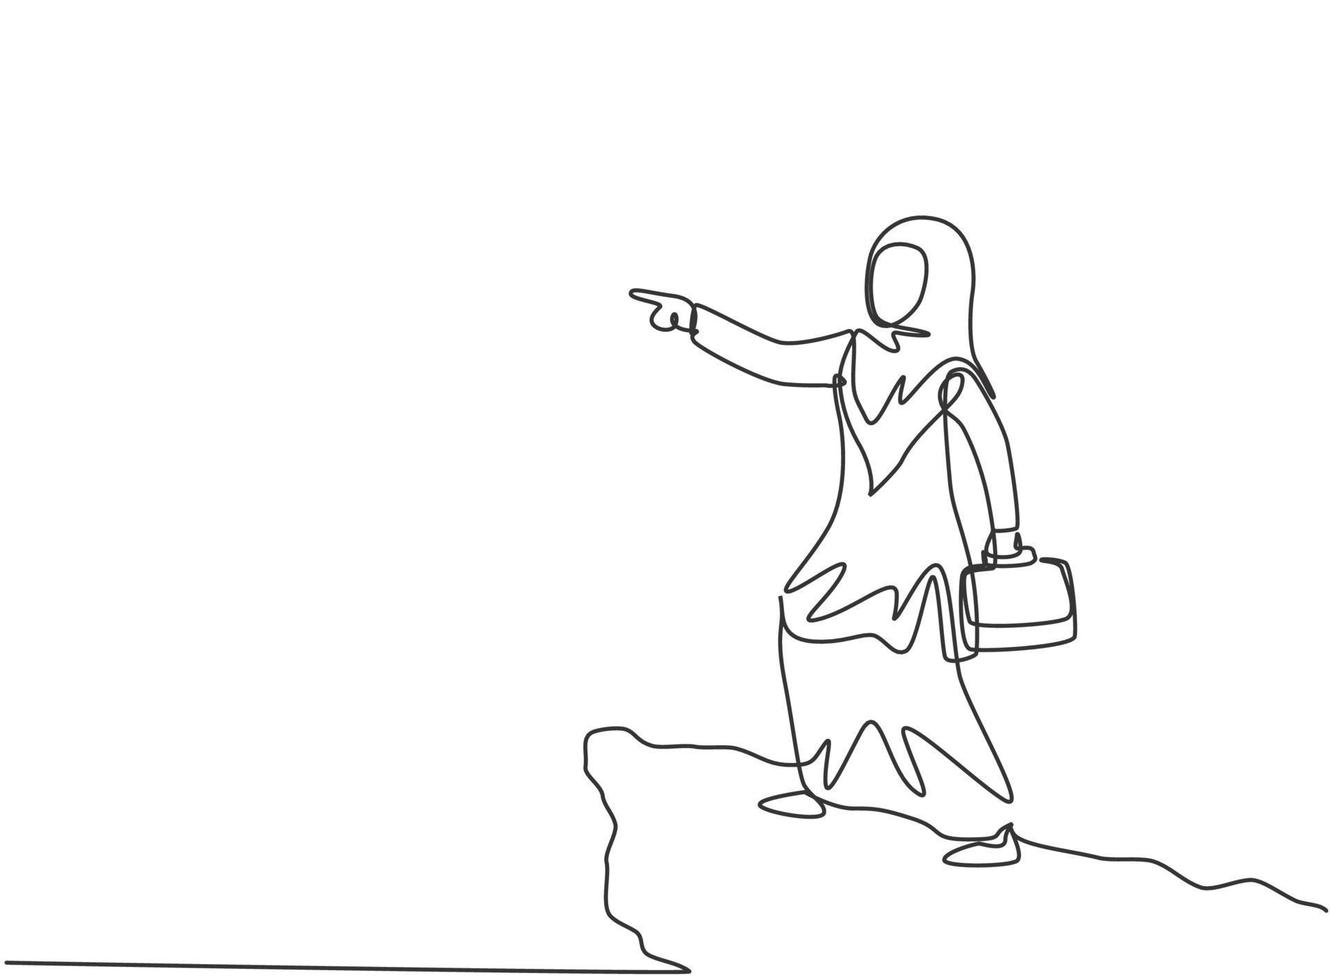 Continuous one line drawing young Arab female worker pointing finger from top of the cliff. Success business manager. Minimalist metaphor concept. Single line draw design vector graphic illustration